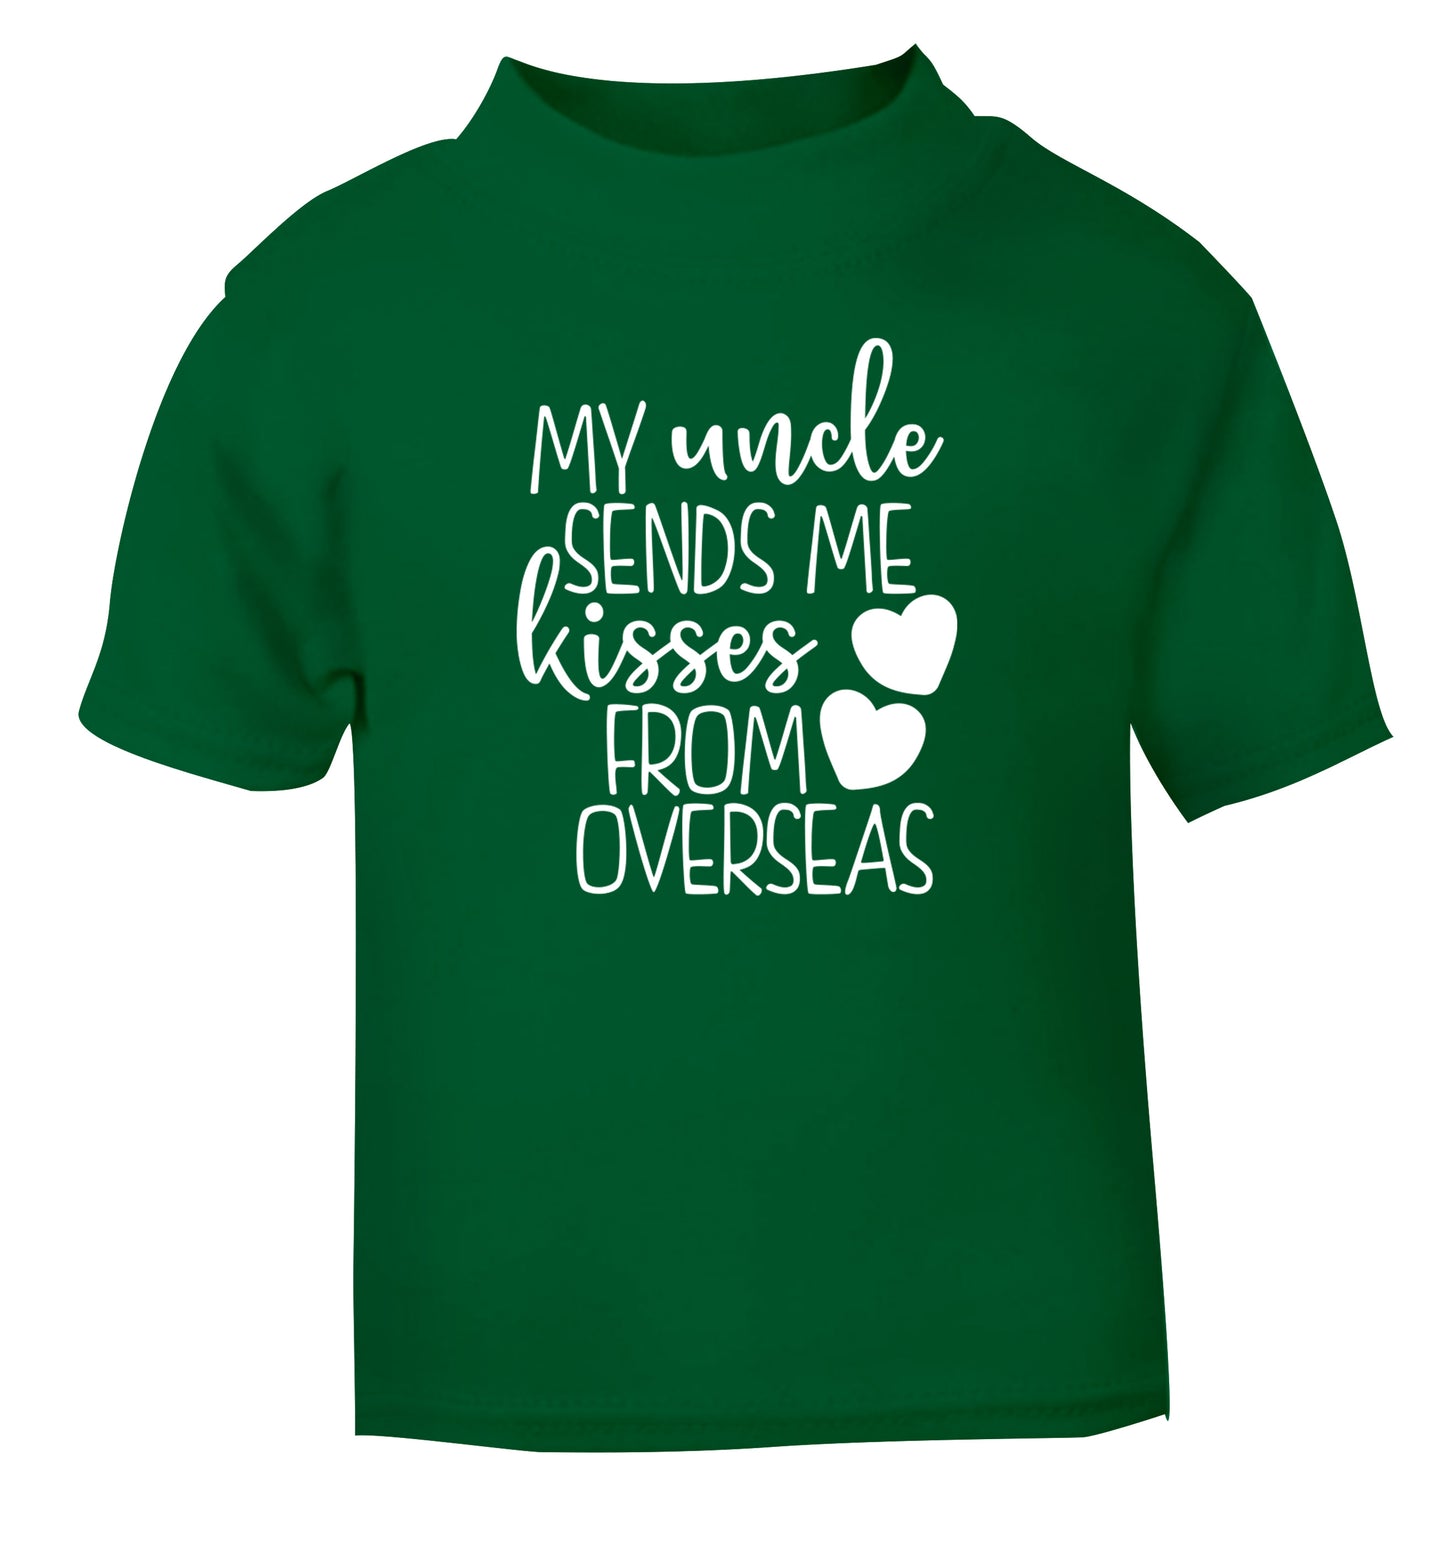 My uncle sends me kisses from overseas green Baby Toddler Tshirt 2 Years